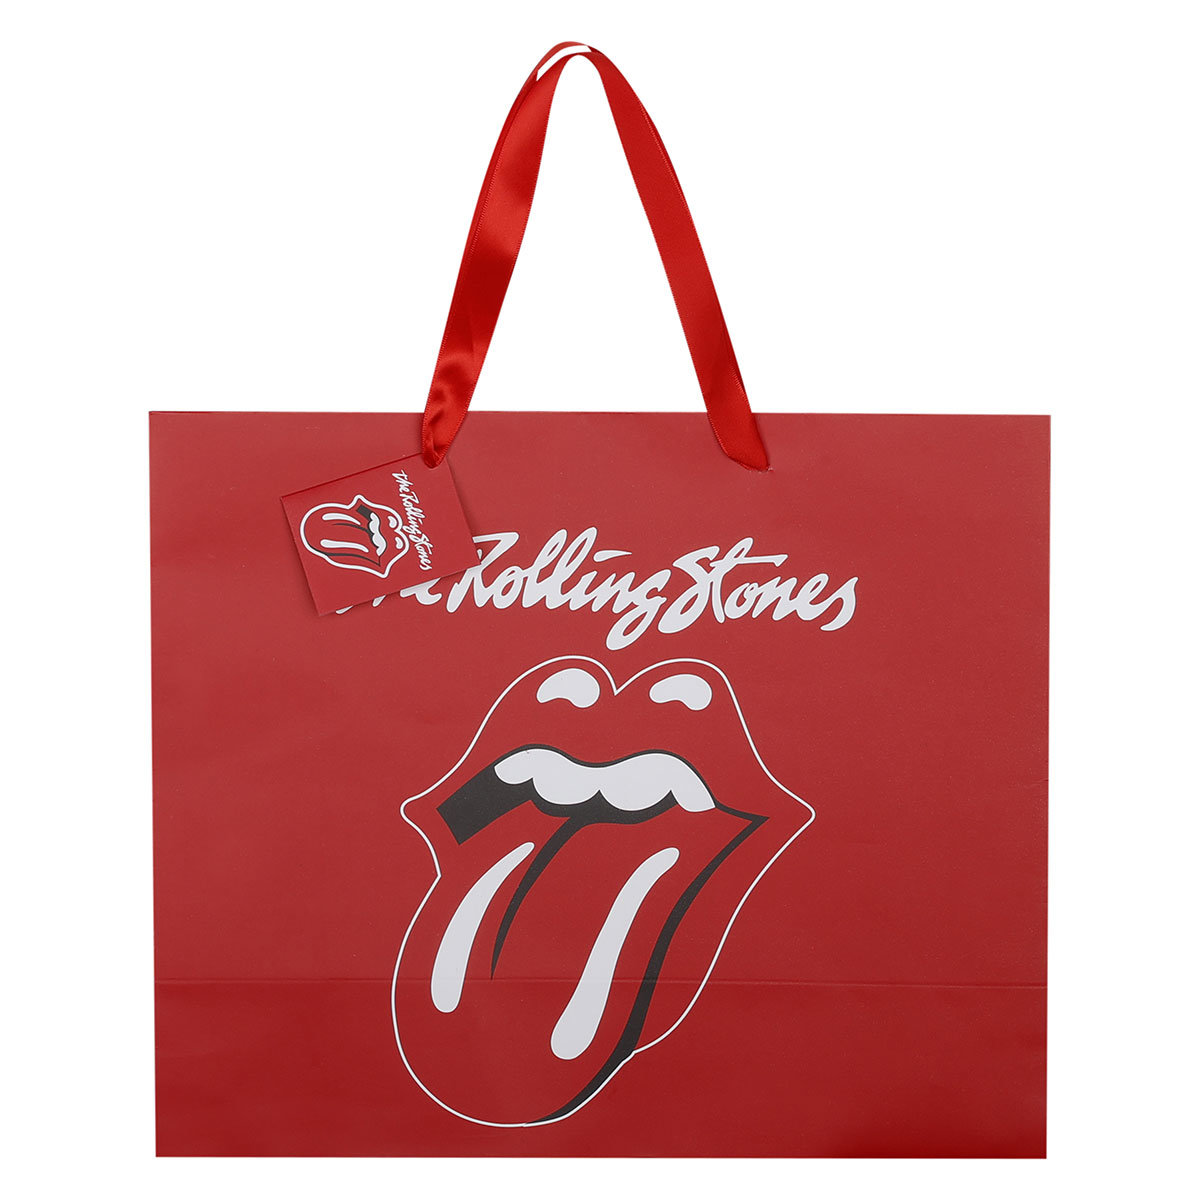 The Rolling Stones 3Pc Baby Set